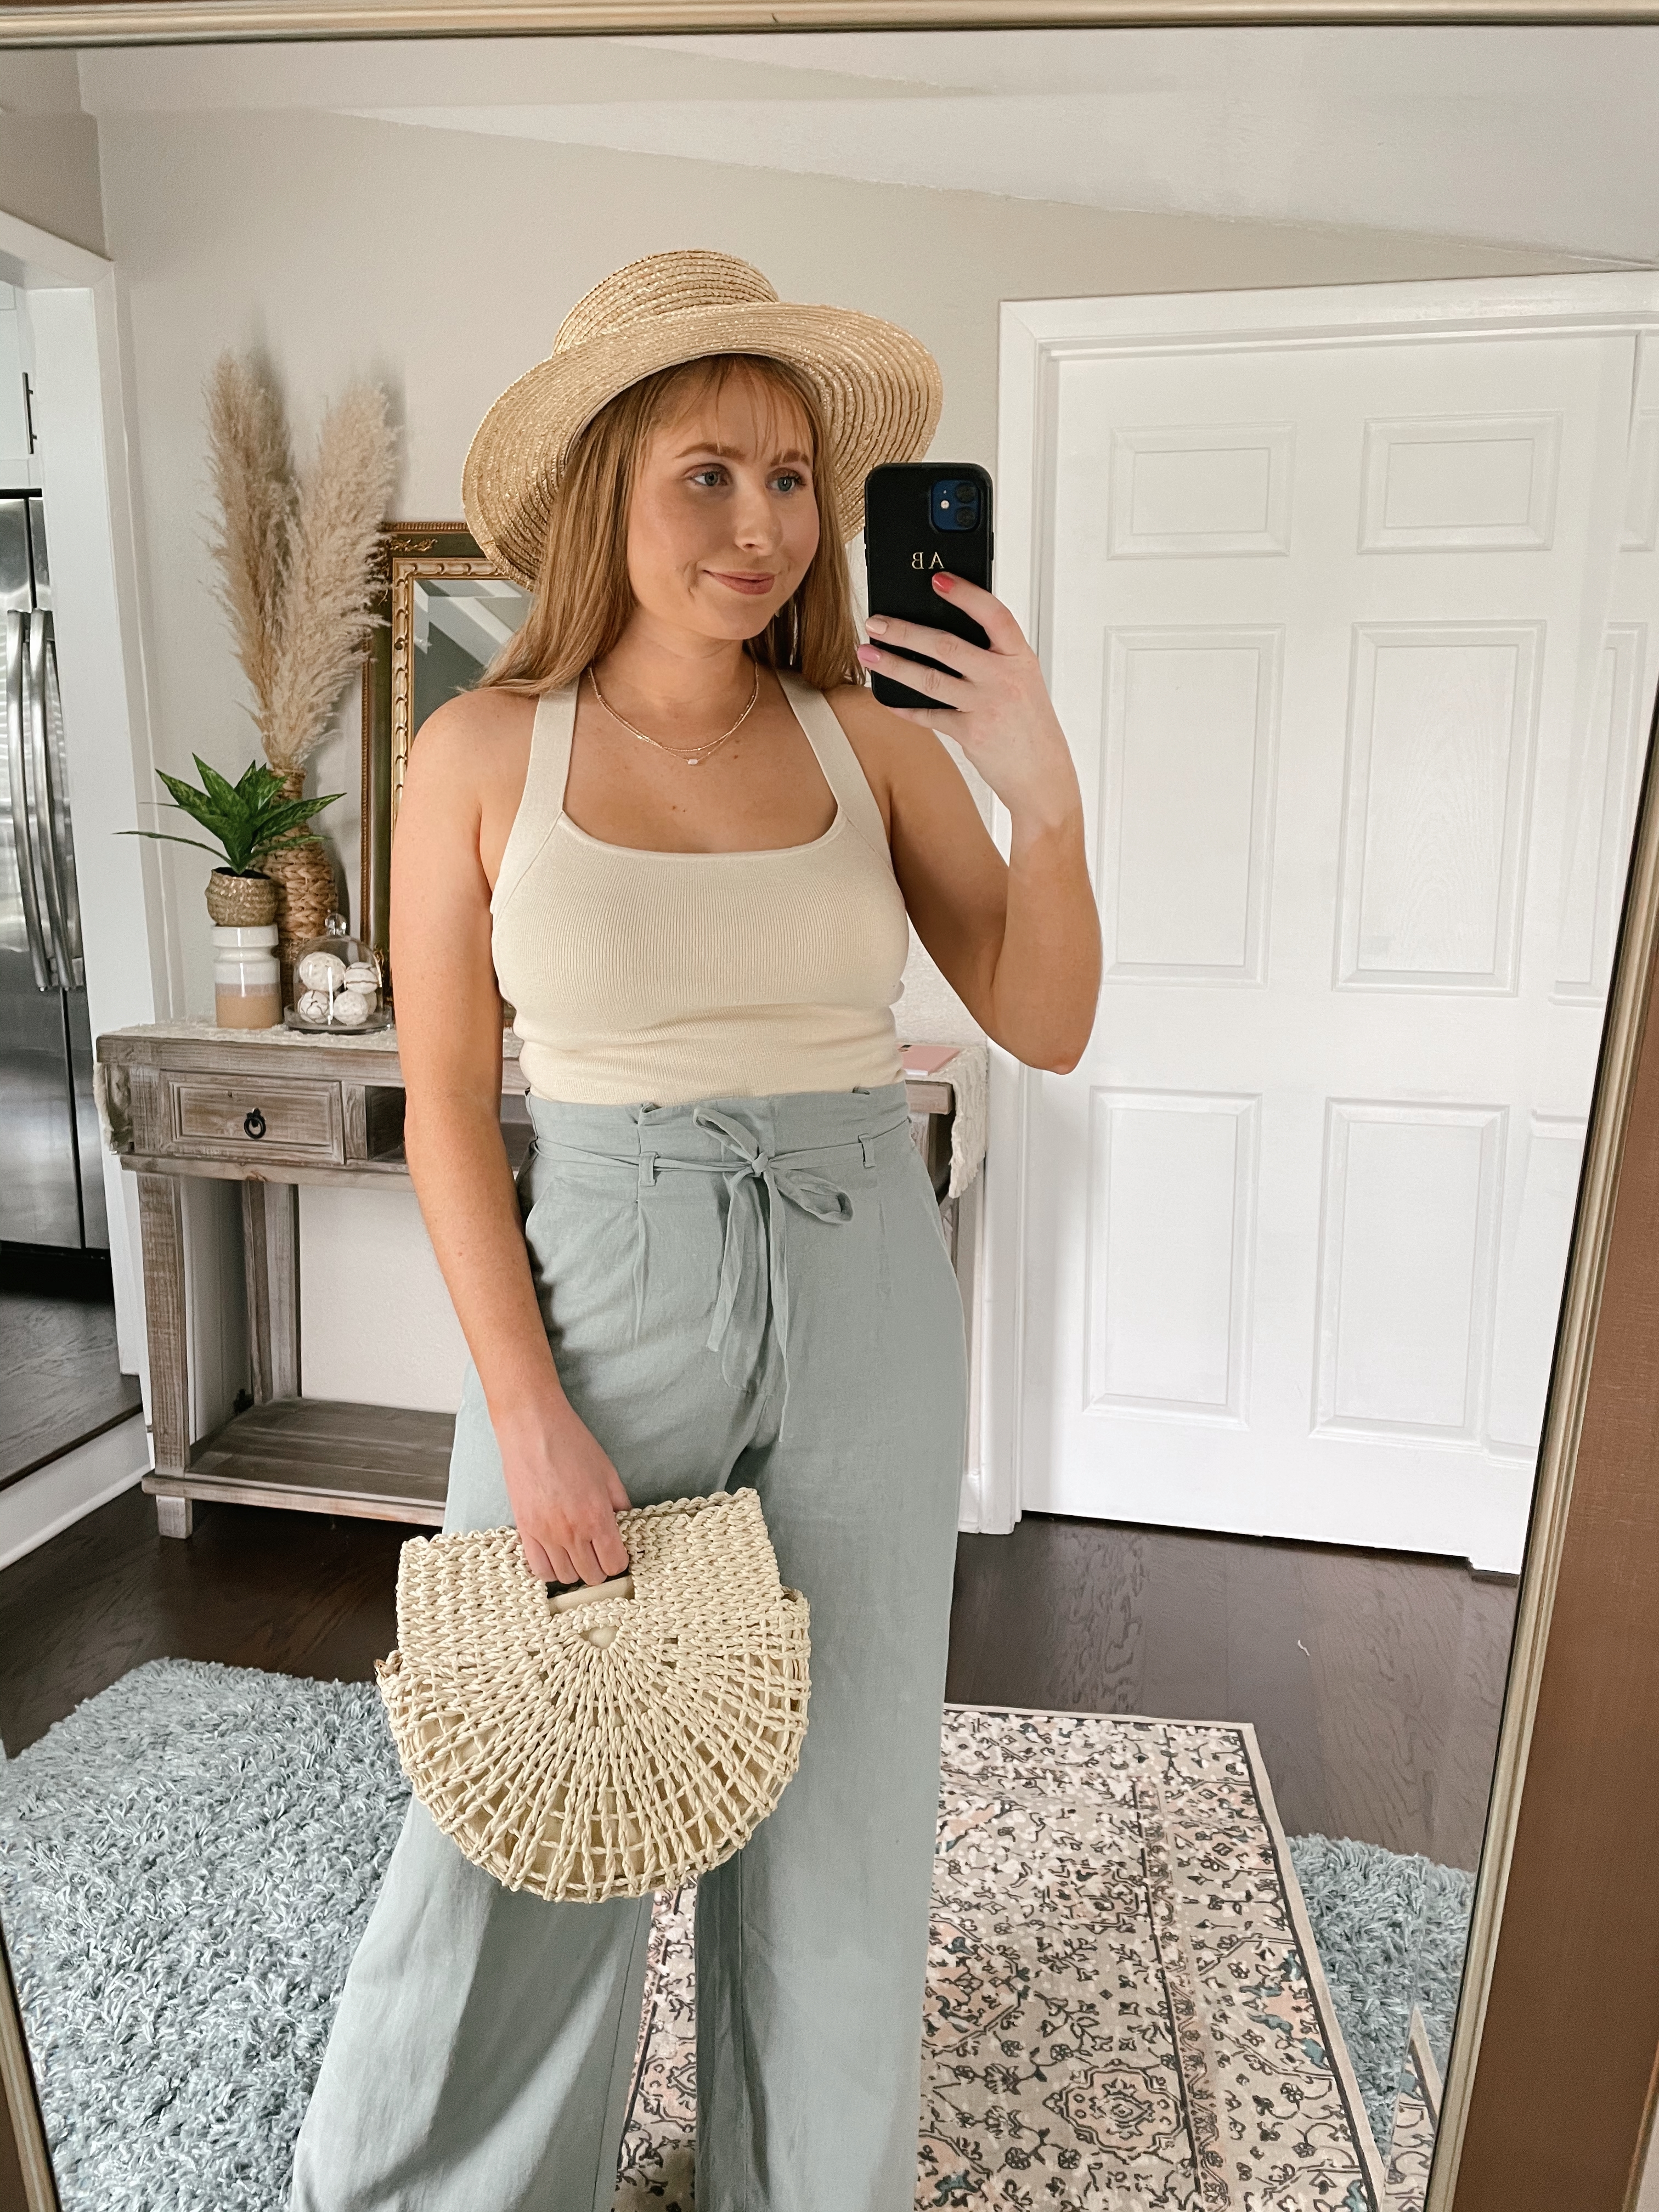 Casual Summer Outfits 2021 | Summer Outfit Inspo 2021 | Cute Summer Outfits 2021 | Summer Style | Affordable by Amanda